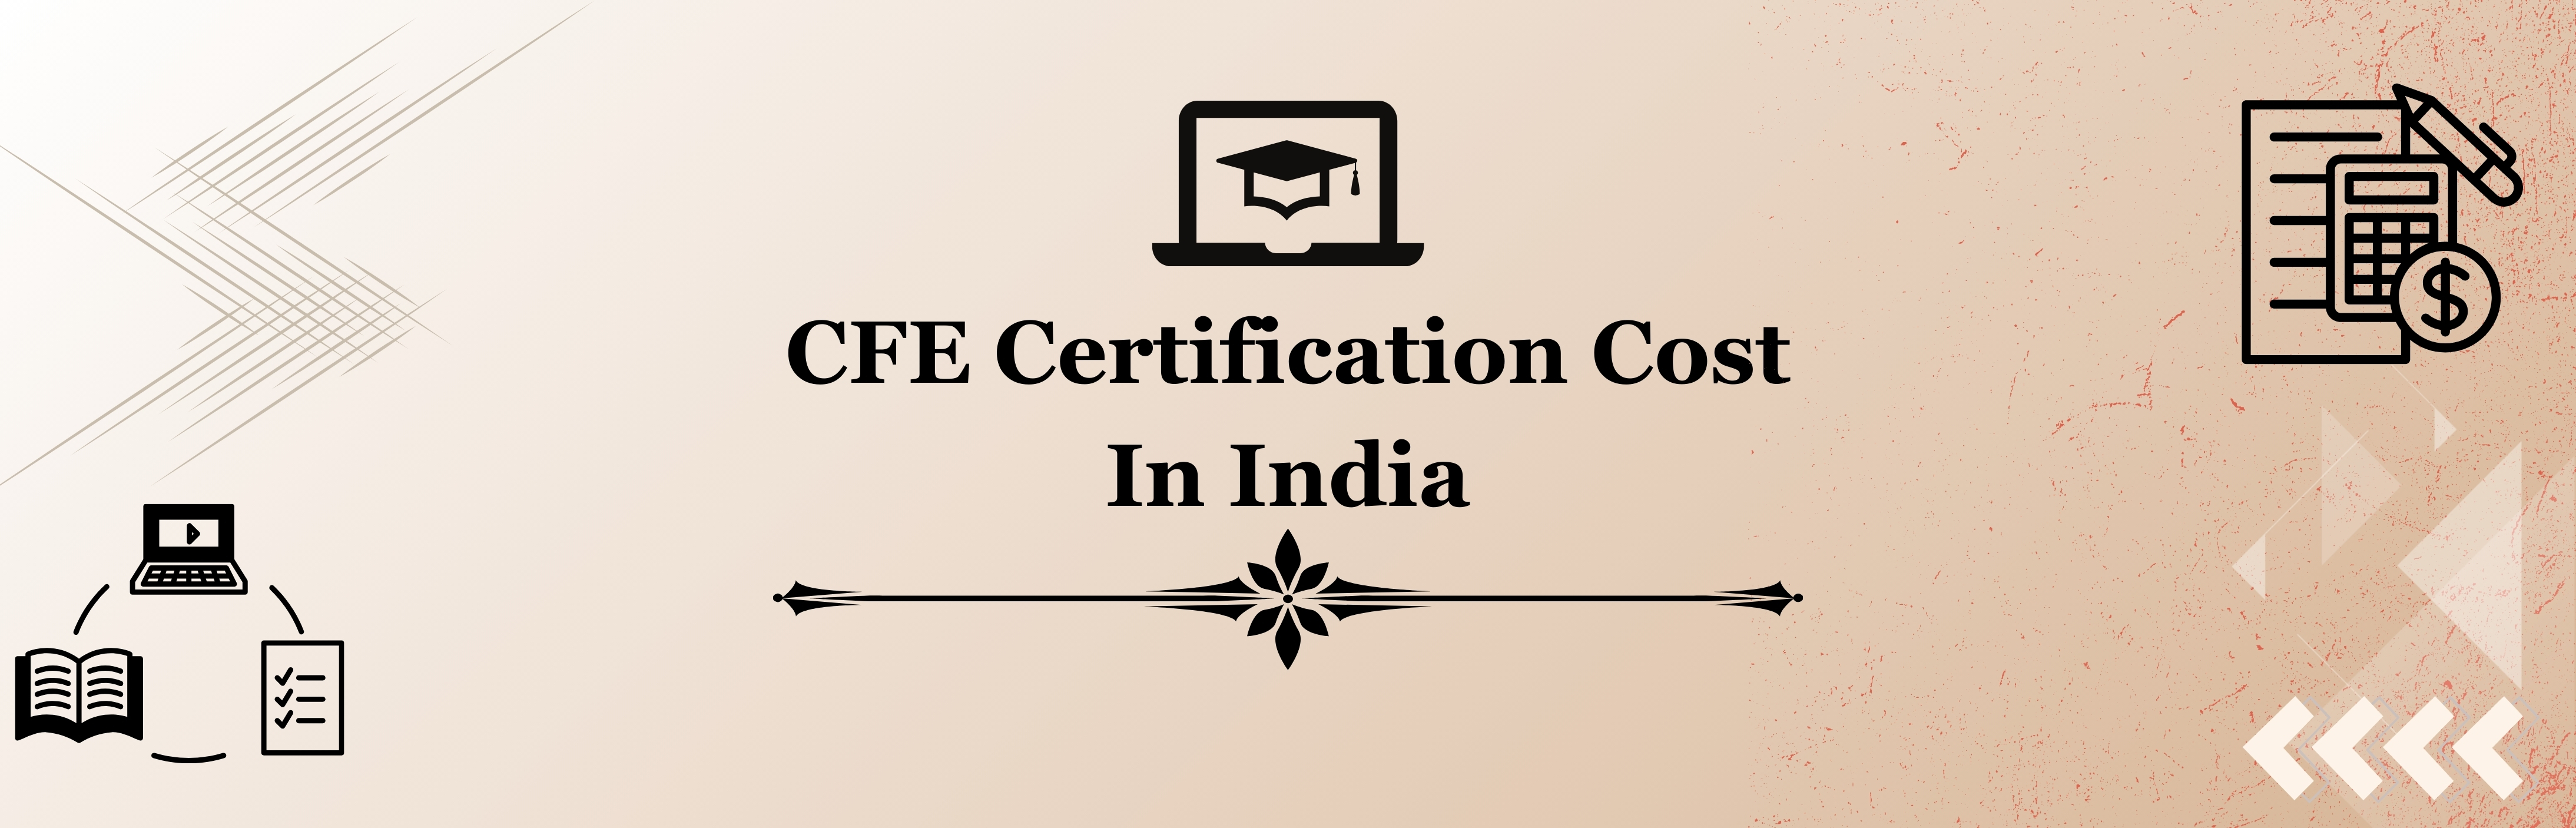 CFE certification cost in India - Academy of Internal Audit